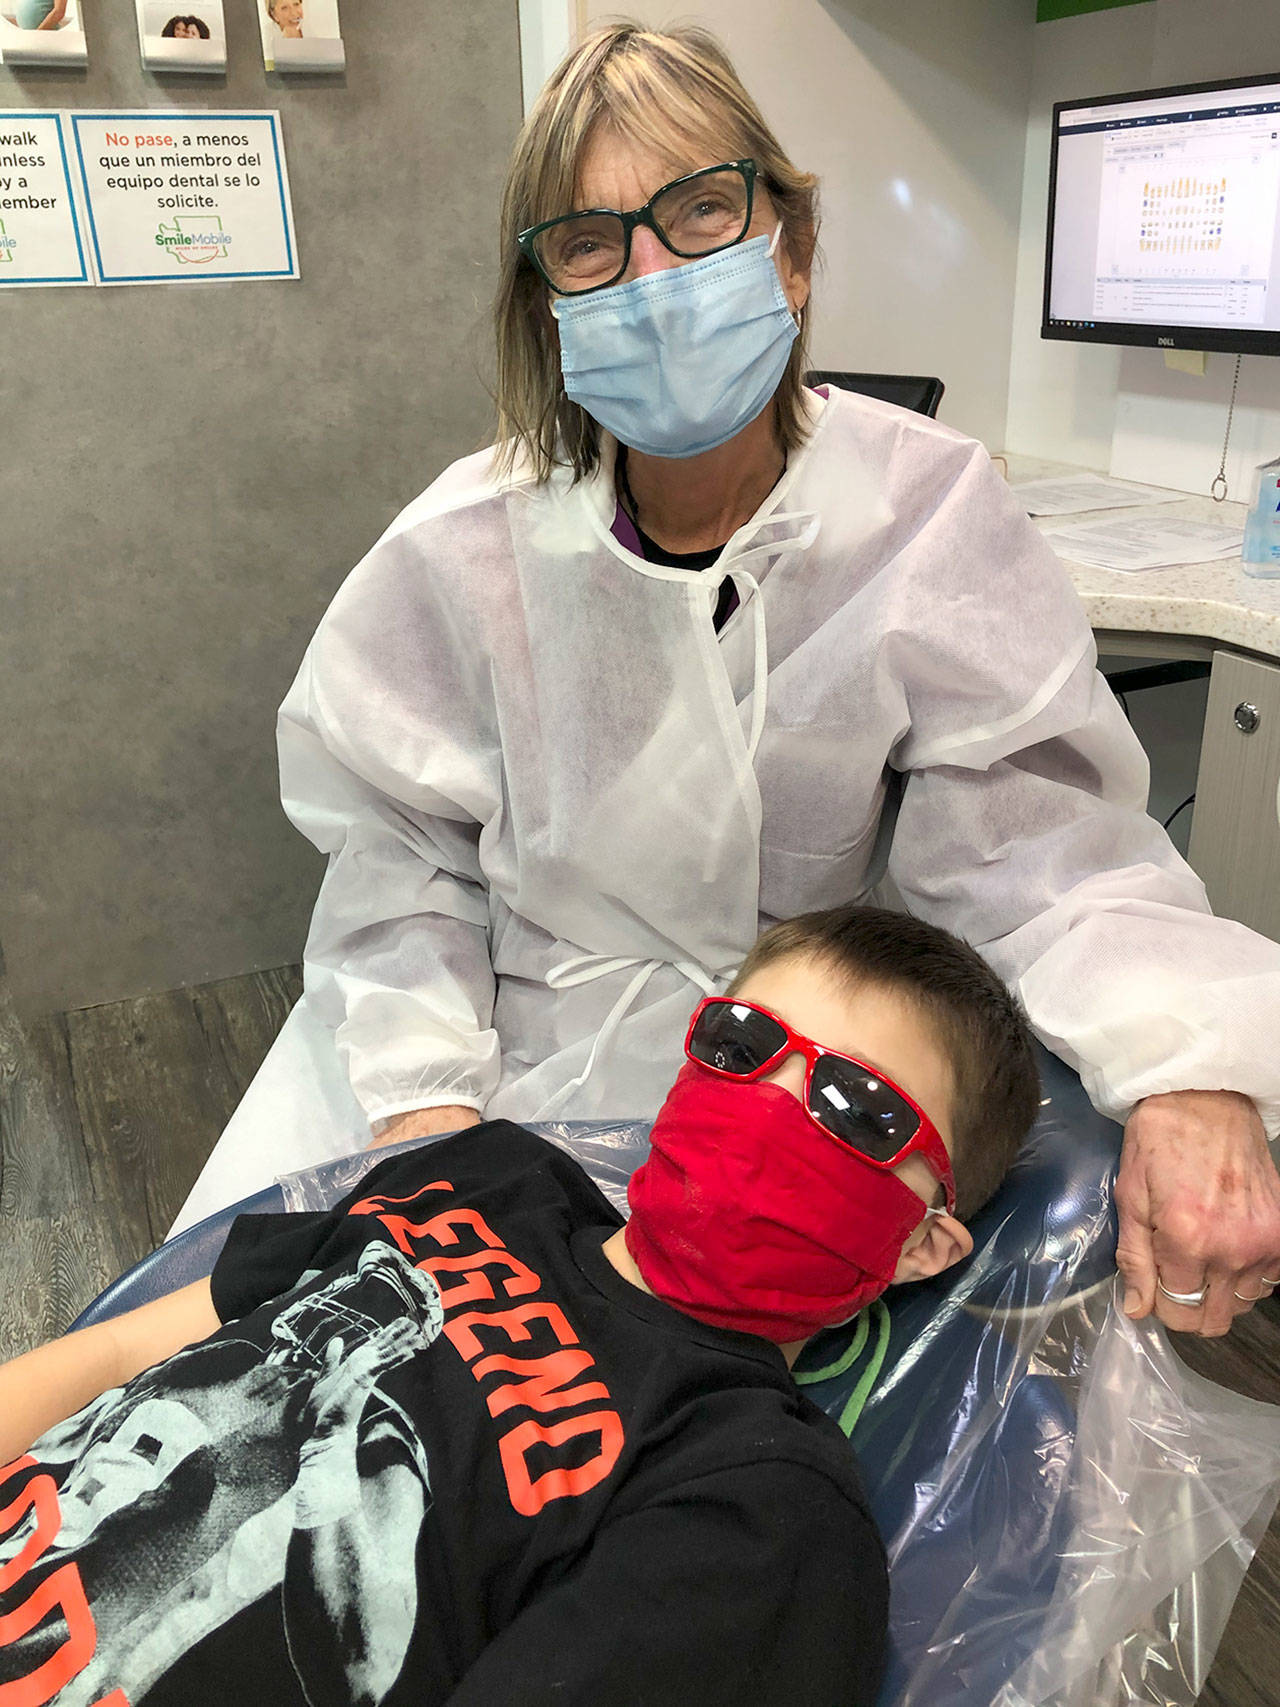 Dr. Ann Sabatino comes this week to Chimacum on the Smilemobile, which provides dental care to babies, children and adults who are uninsured or covered by Medicaid. To make an appointment, phone 888-286-9105. (Photo courtesy of the Smilemobile)